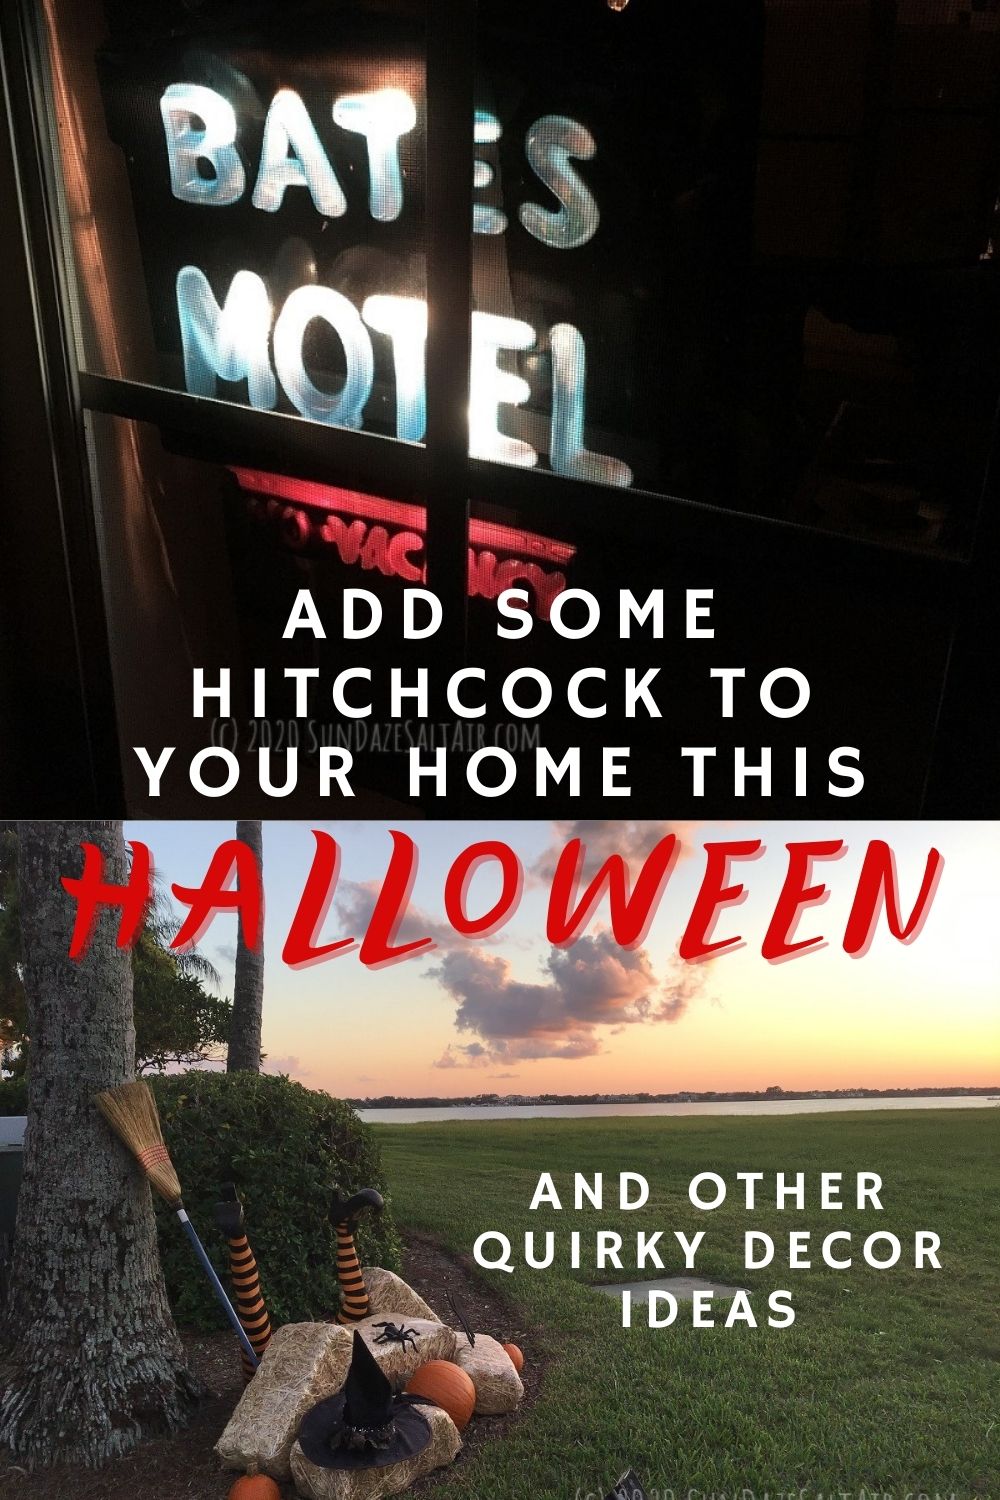 Add some Hitchcock to your home this Halloween with a Bates Motel neon window sign & other quirky decor like upside down witch leg yard stakes